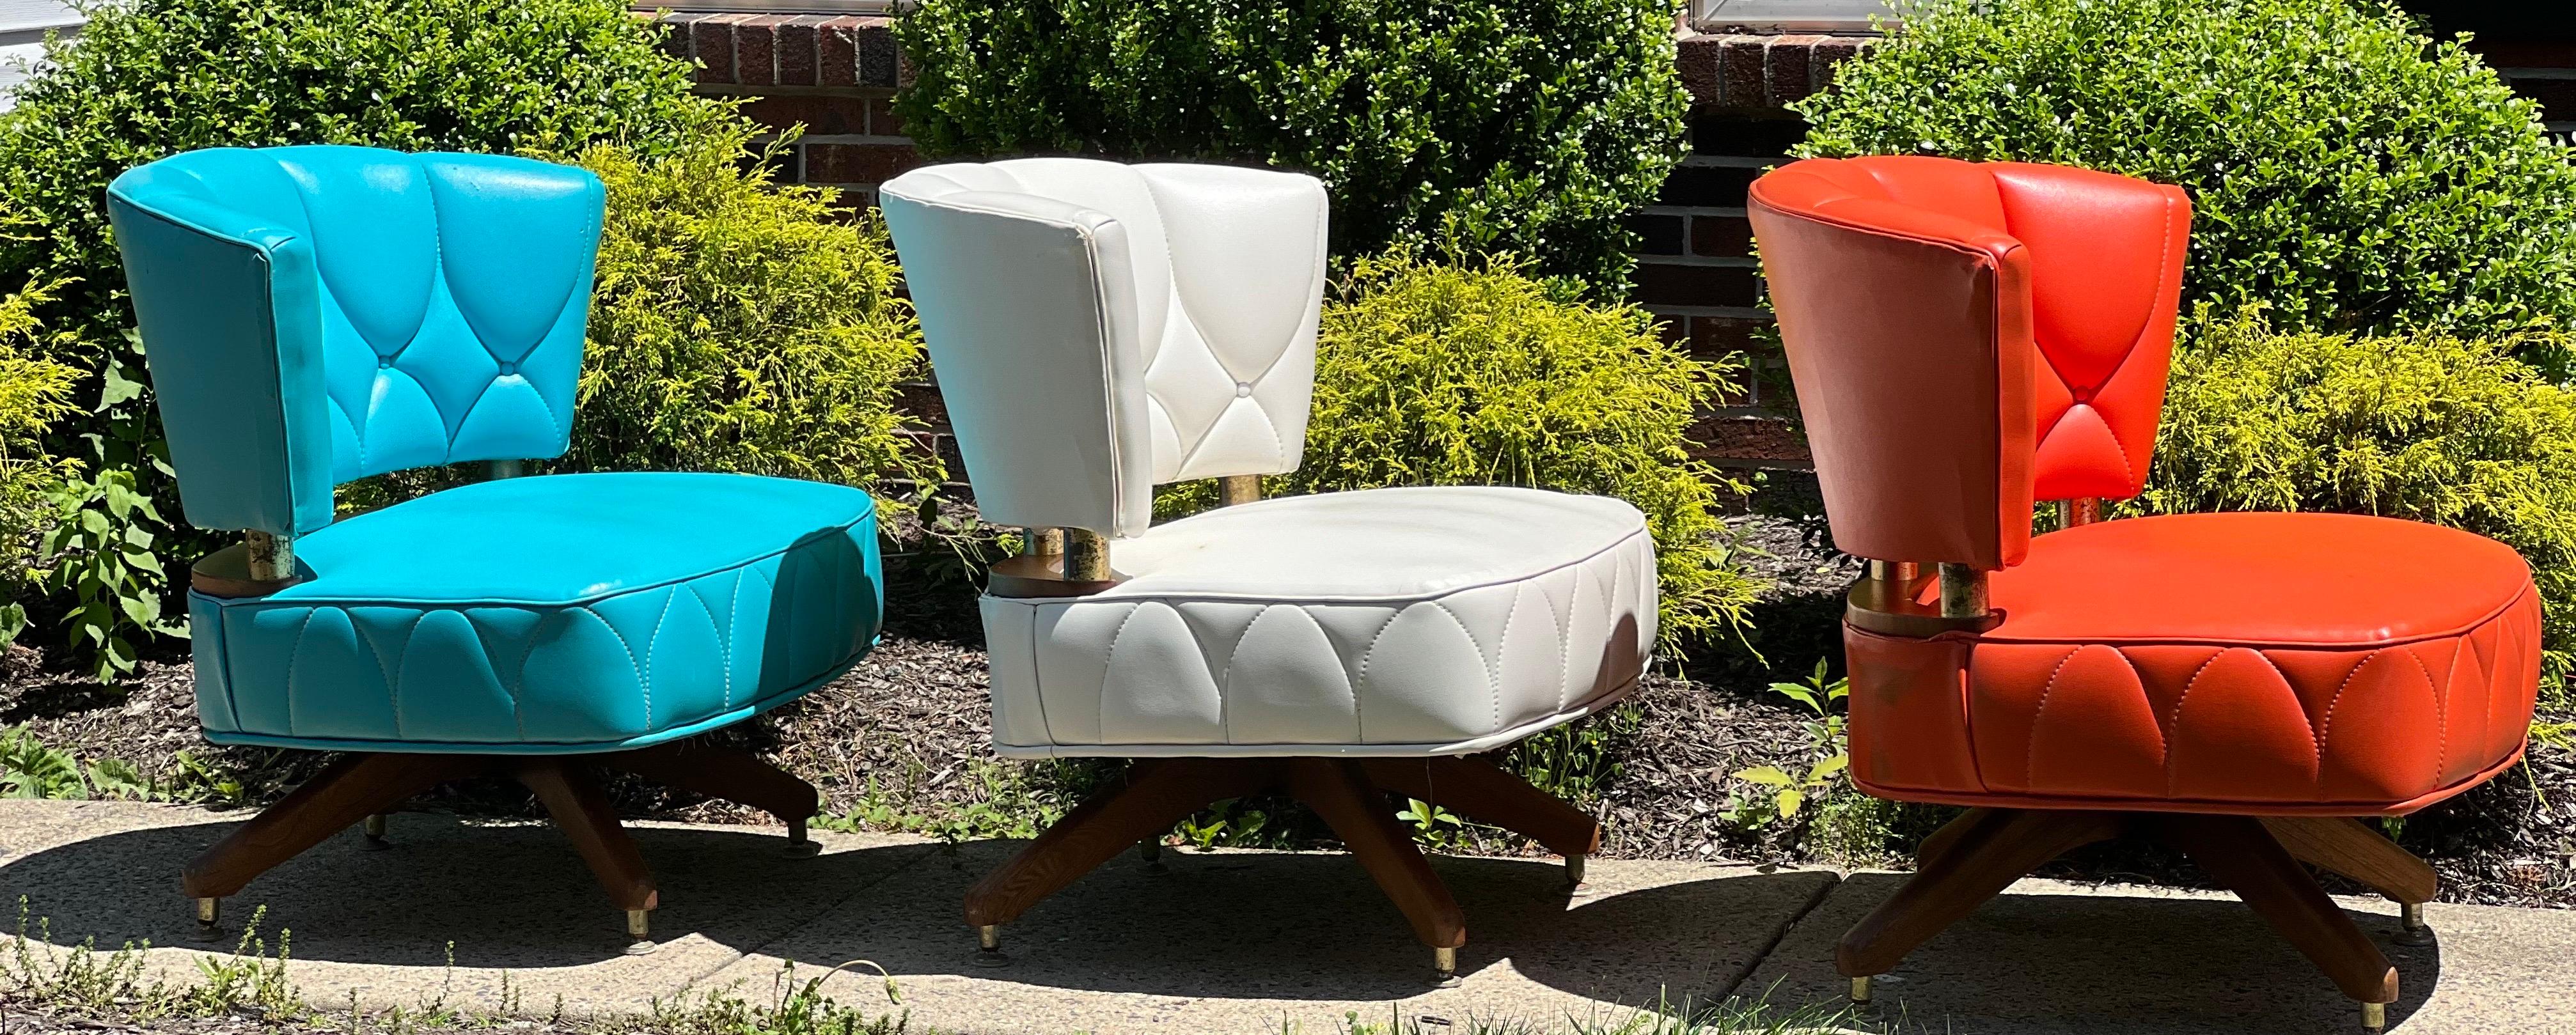 Fabulous, unique set of vintage Kroehler swivel slipper chairs, 1962. 

Offered as the original set of three boldly colorful chairs. They look stunning together and would be fantastic in a single space. The generous seats are very comfortable and